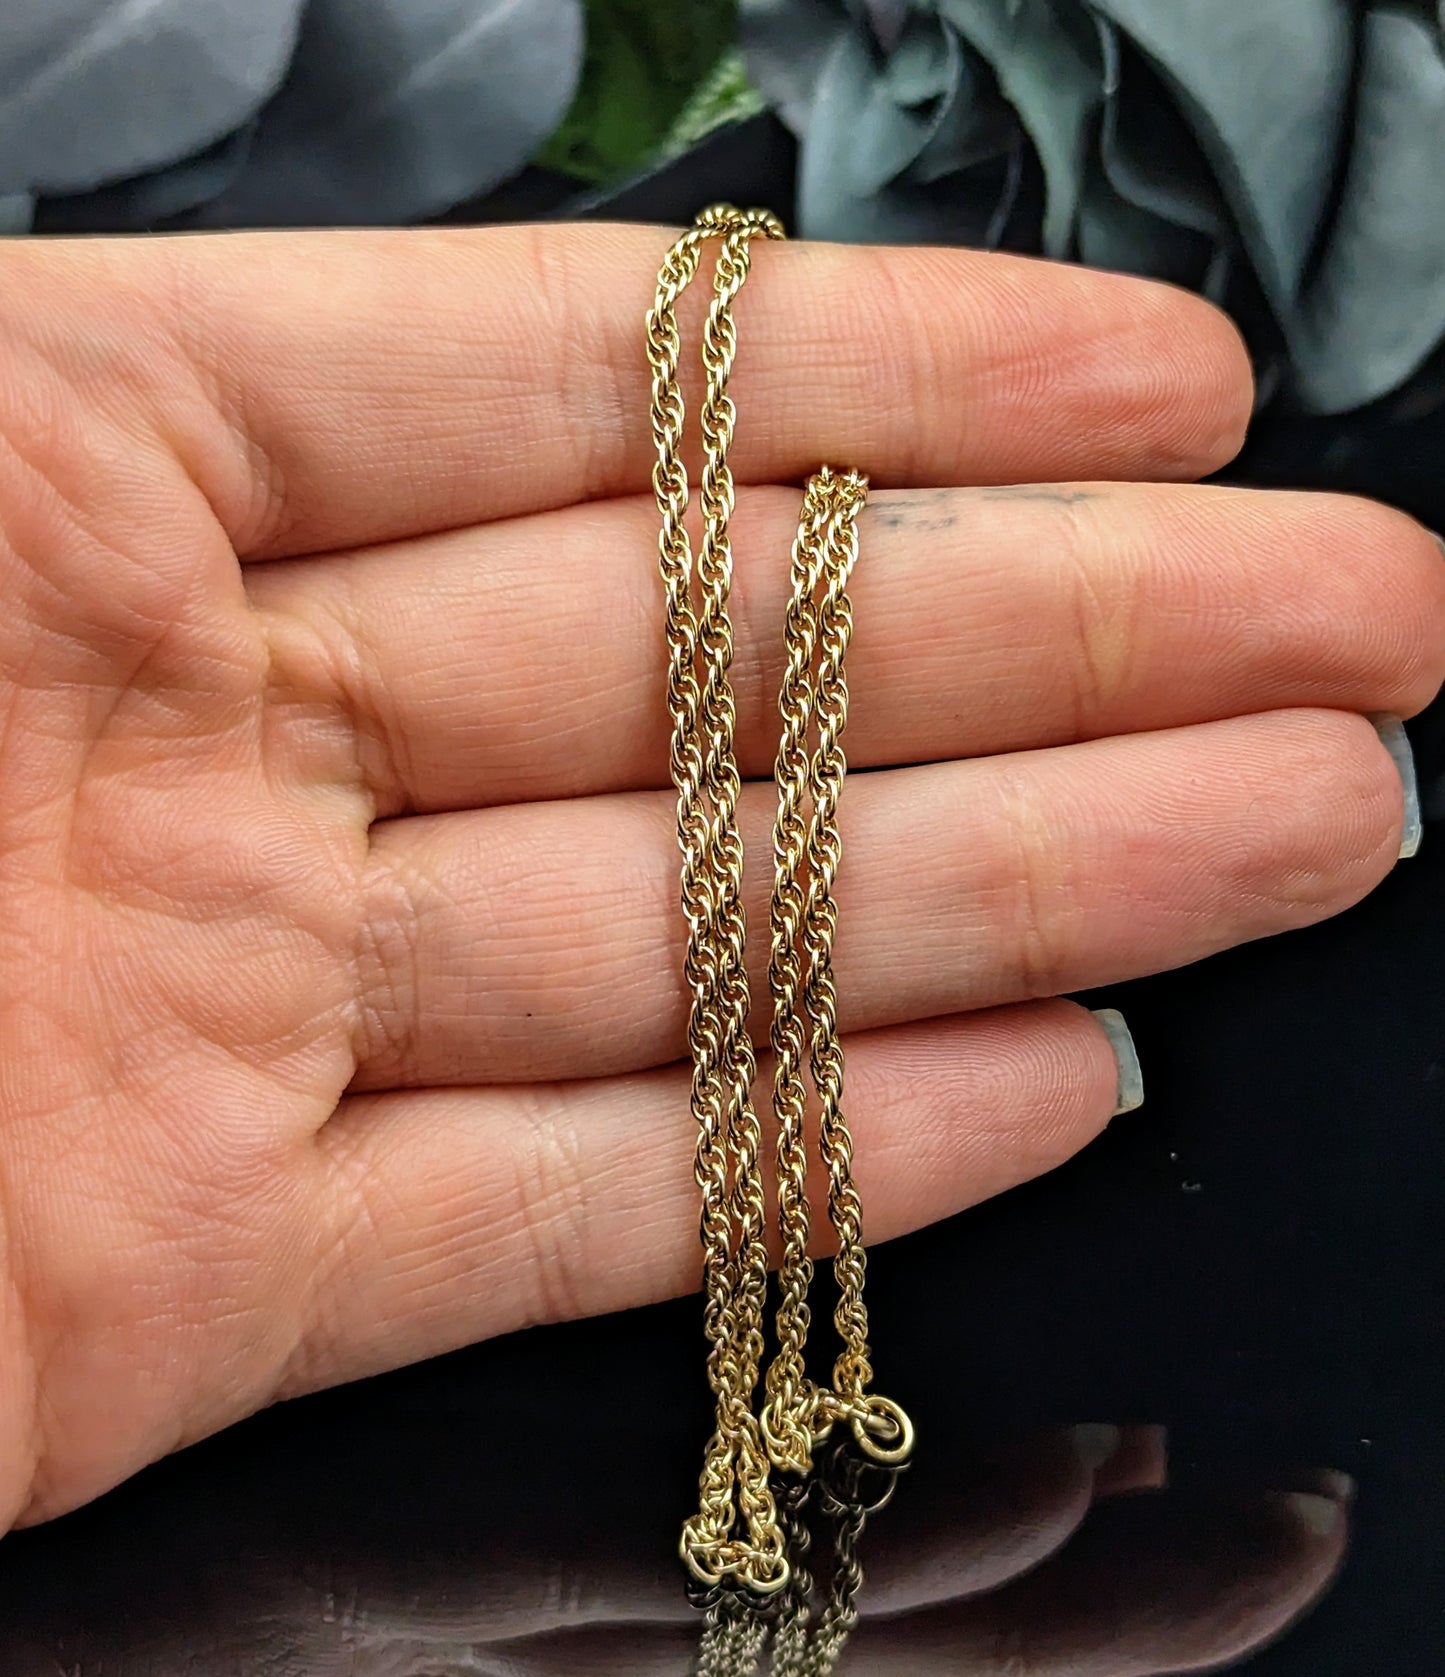 Vintage 9ct yellow gold fancy link chain necklace, Spiga link